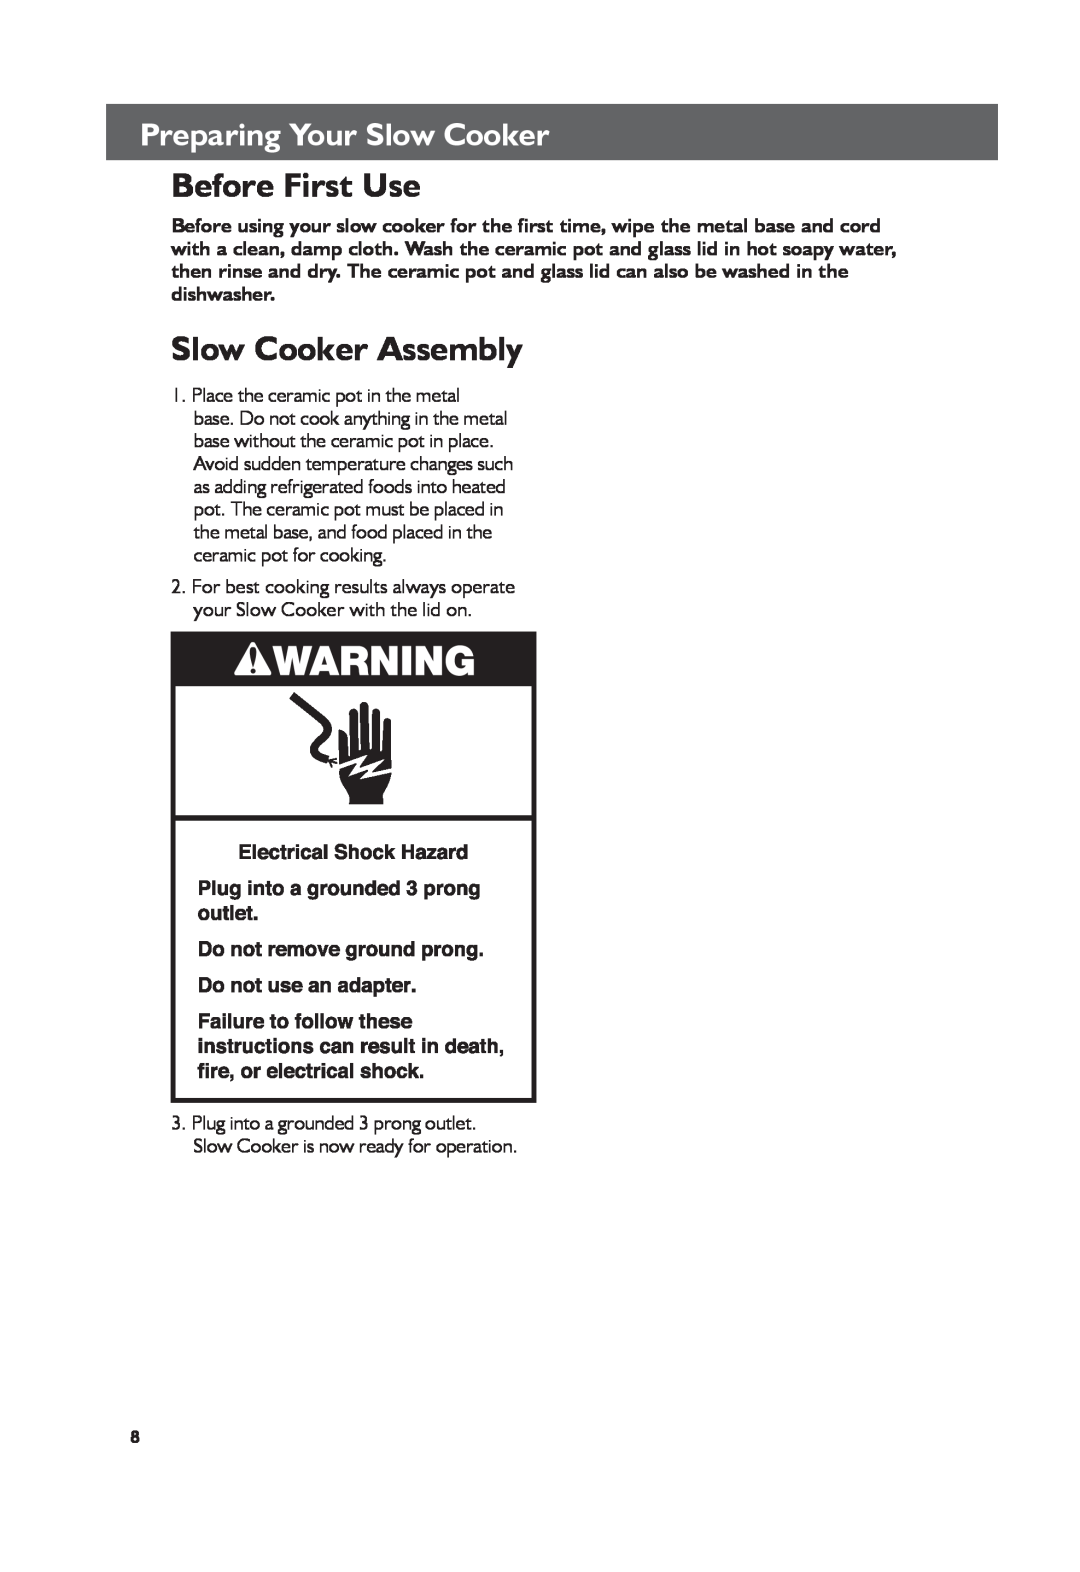 KitchenAid KSC6222, KSC6223 manual Before First Use, Slow Cooker Assembly, Preparing Your Slow Cooker 